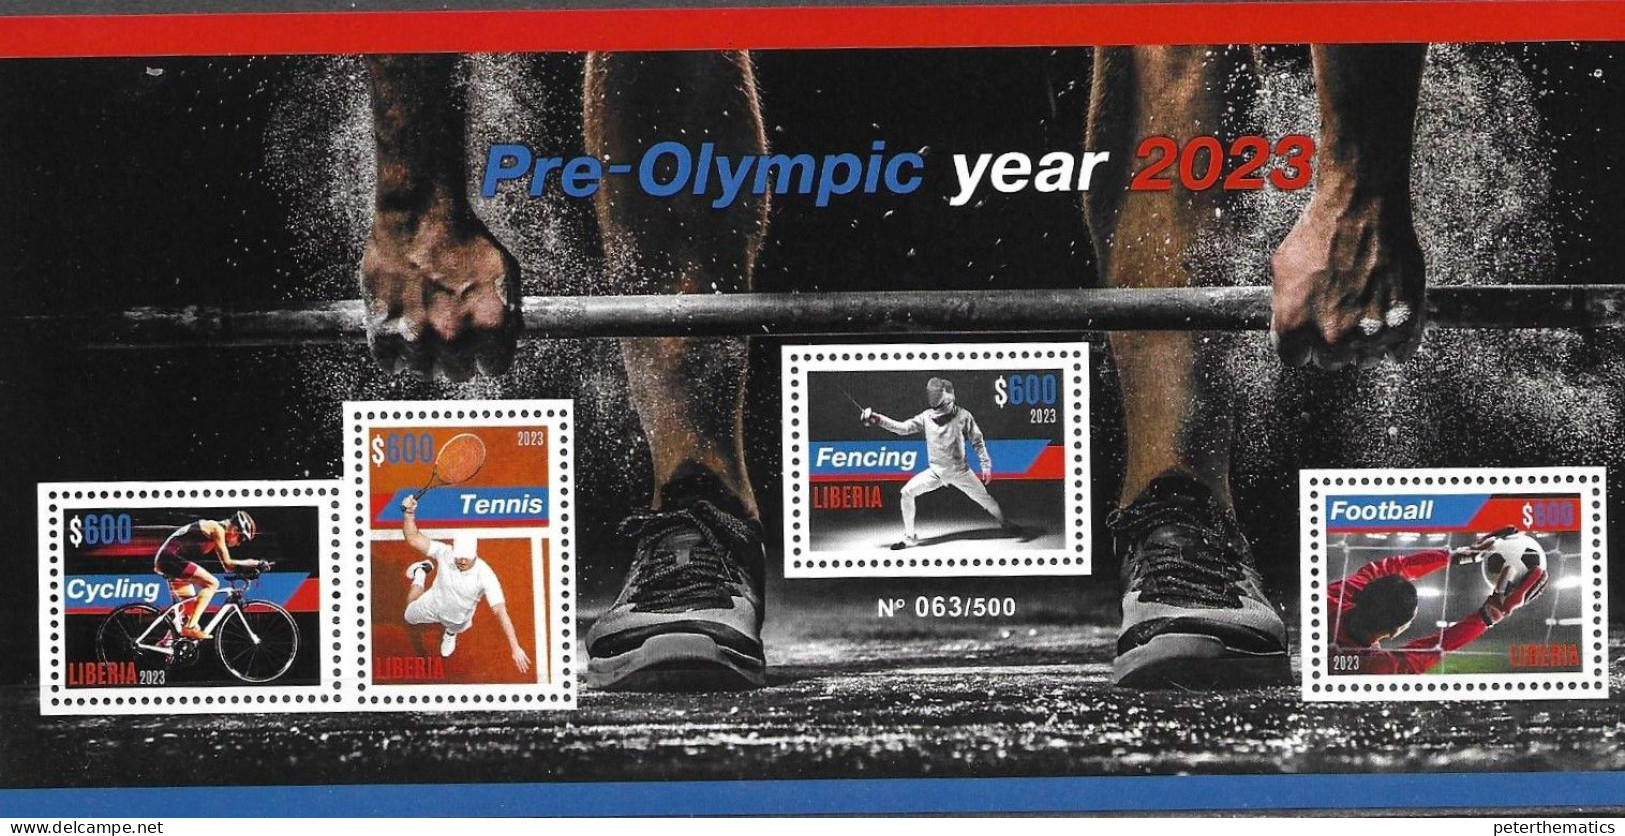 LIBERIA, 2023, MNH, PREOLYMPIC ISSUE, PARIS OLYMPICS, FOOTBALL, CYCLING, TENNIS, FENCING, LIMITED NUMBERED SLT, OFFICIAL - Summer 2024: Paris